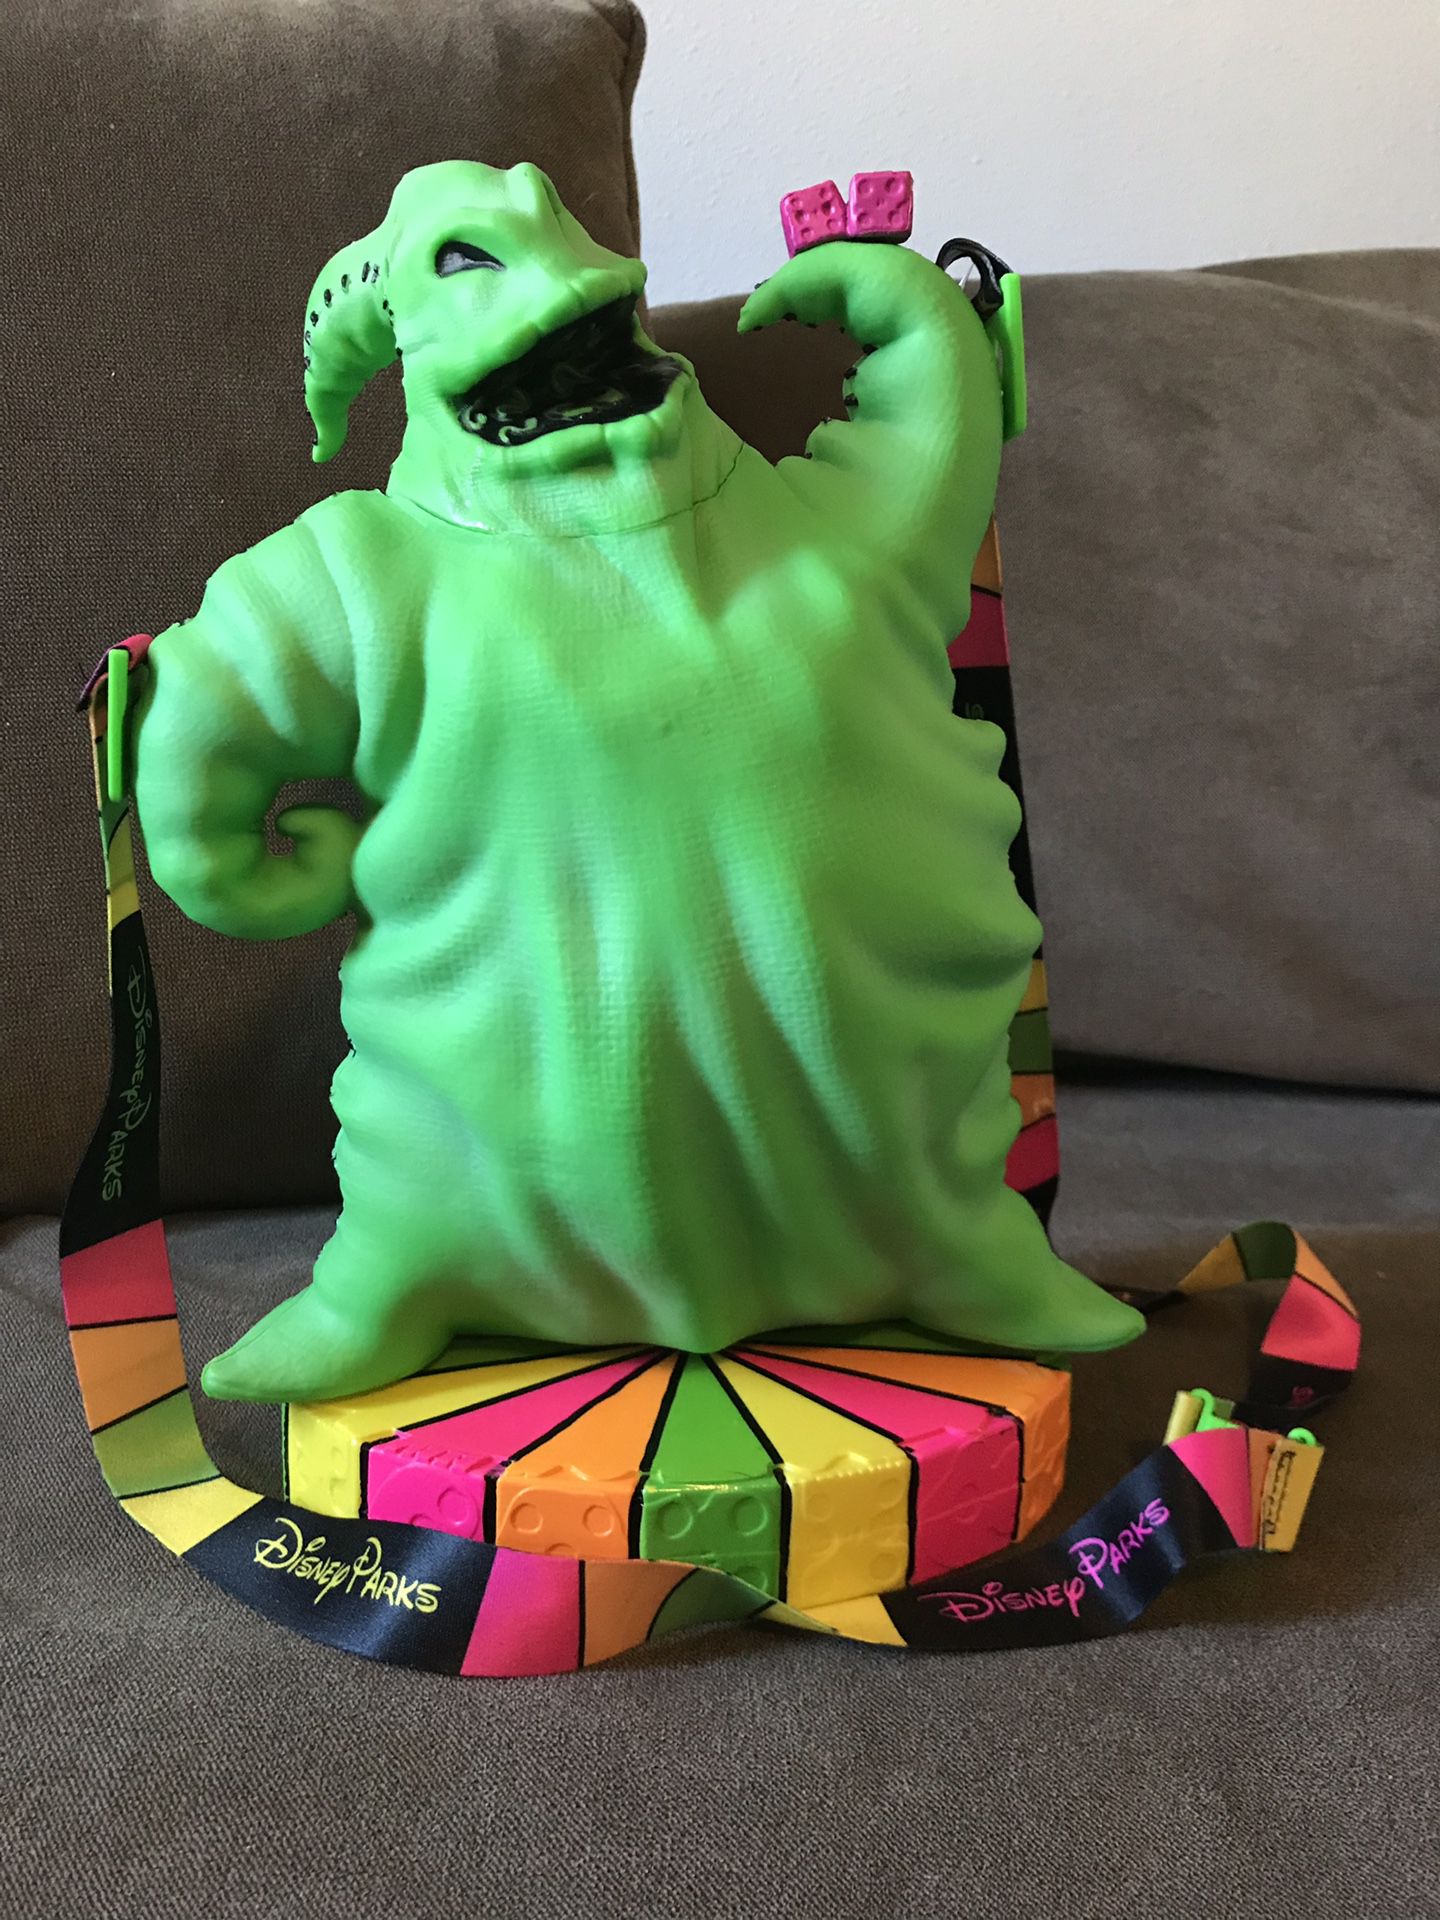 Nightmare Before Christmas [Limited Edition] Oogie Boogie Popcorn Bucket